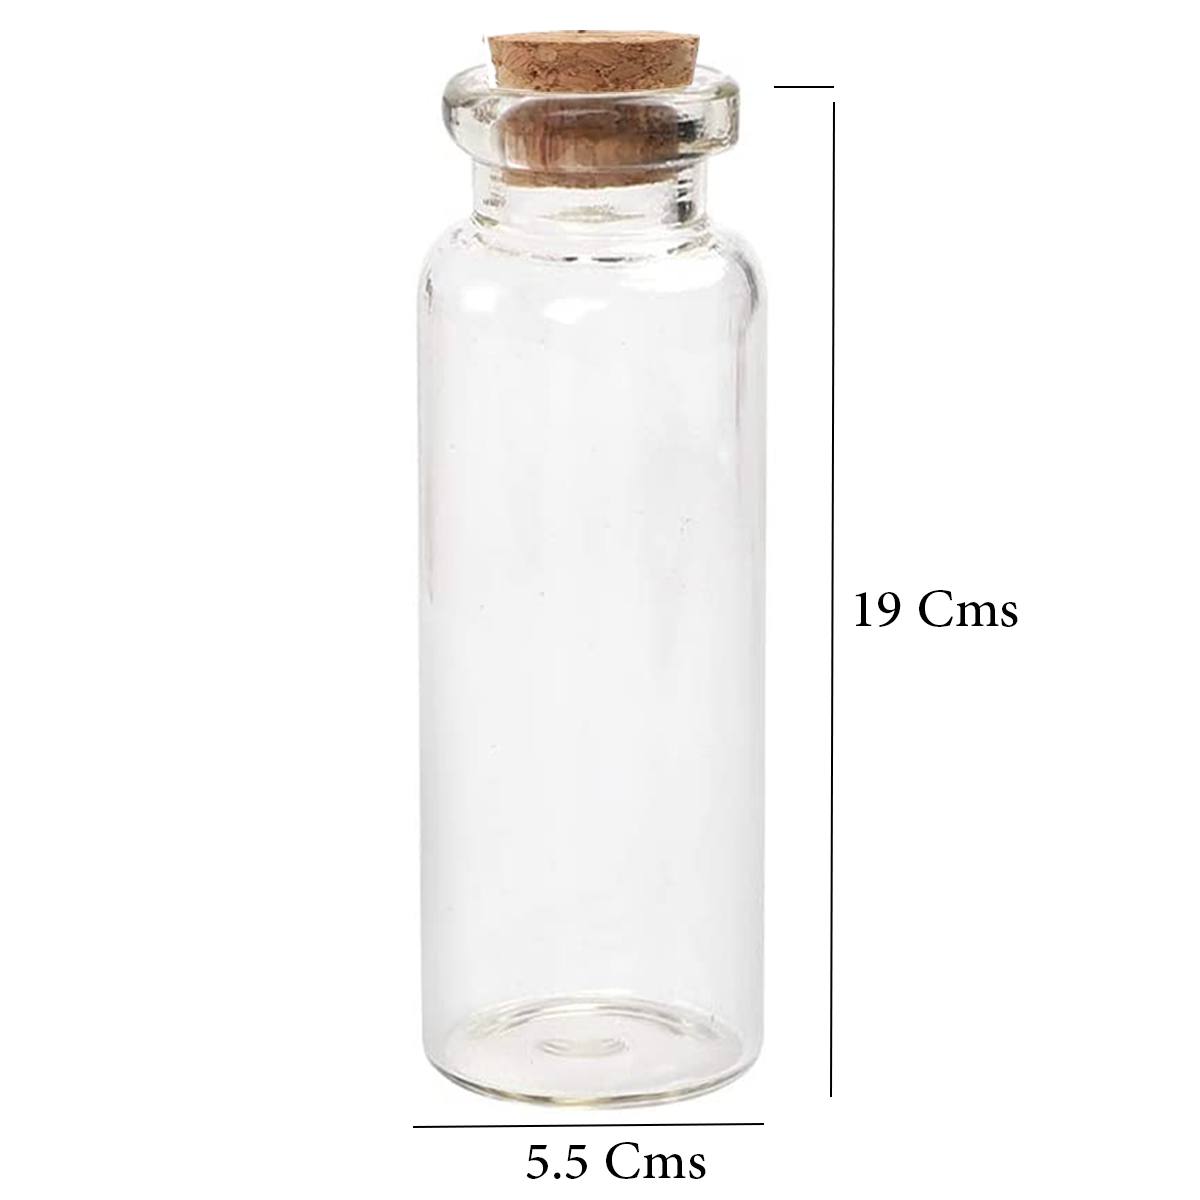 12Pcs Mini Glass Jars Bottles with Cork Stoppers Wish Bottles for DIY Arts & Crafts 300ml (19x5.5Cms)